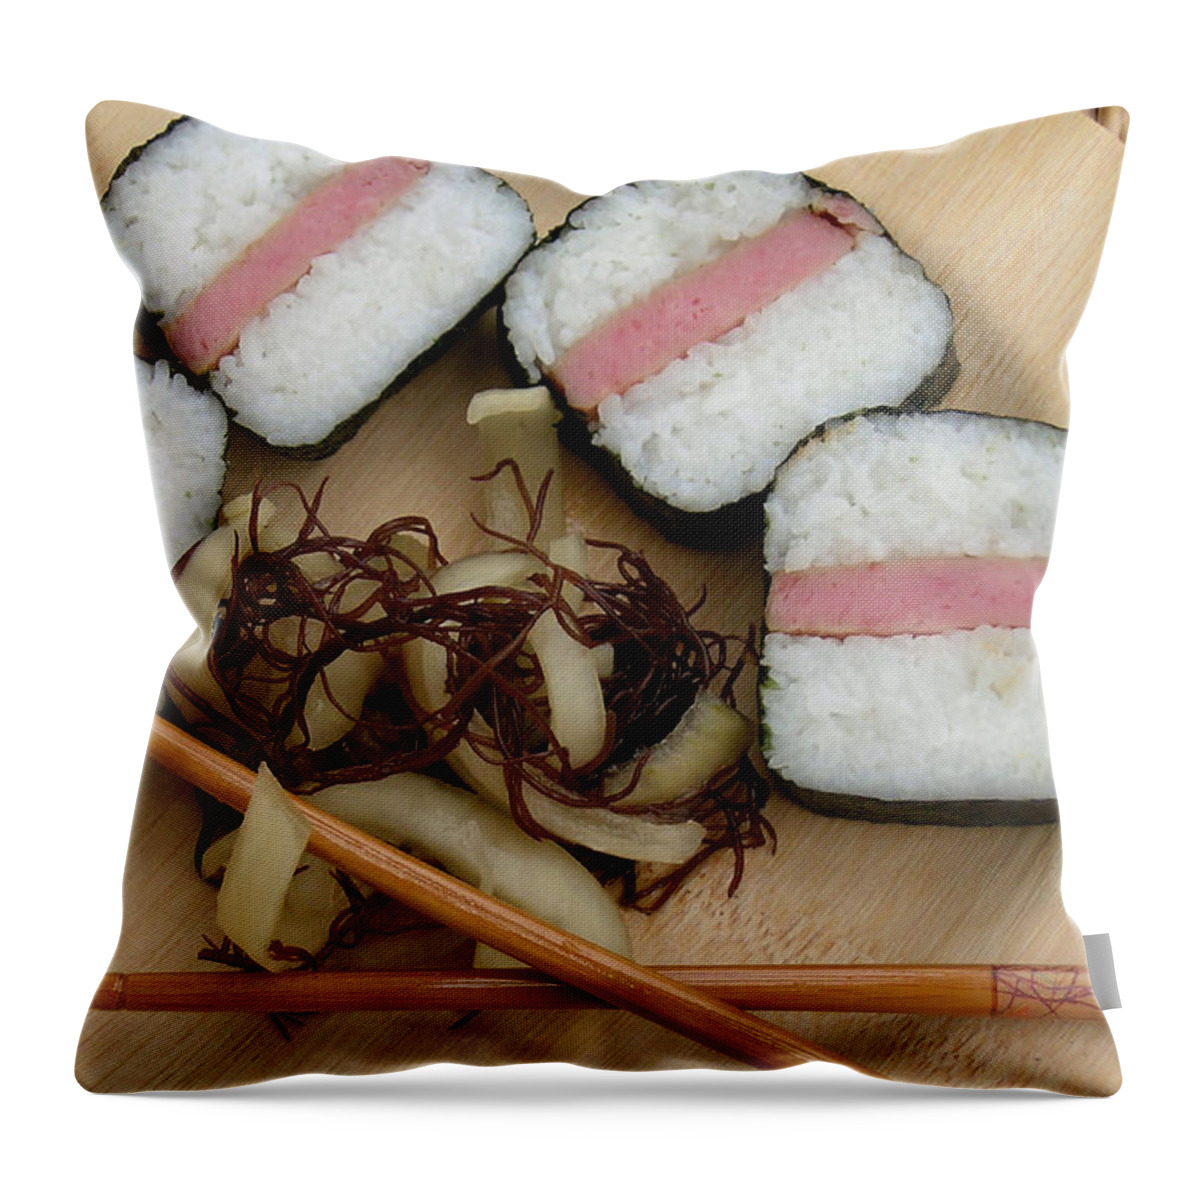 Spam Throw Pillow featuring the photograph Hawaiian Spam Musubi by James Temple